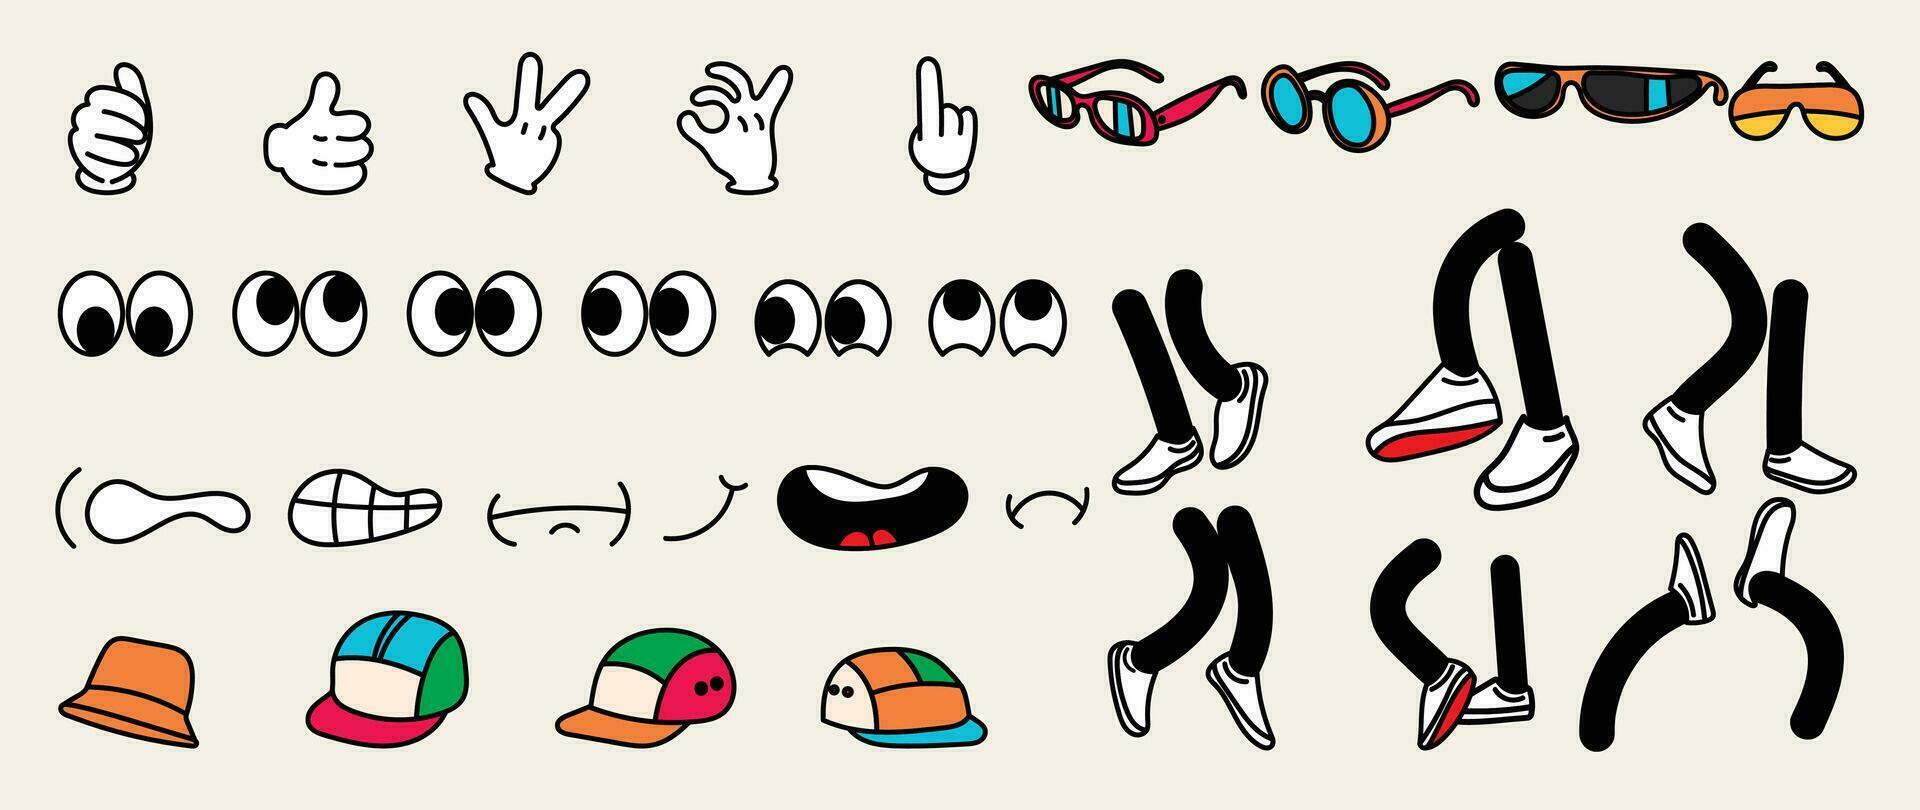 Set of 70s groovy comic vector. Collection of cartoon character faces in different emotions, hand, glove, glasses, hat, shoes. Cute retro groovy hippie illustration for decorative, sticker. vector